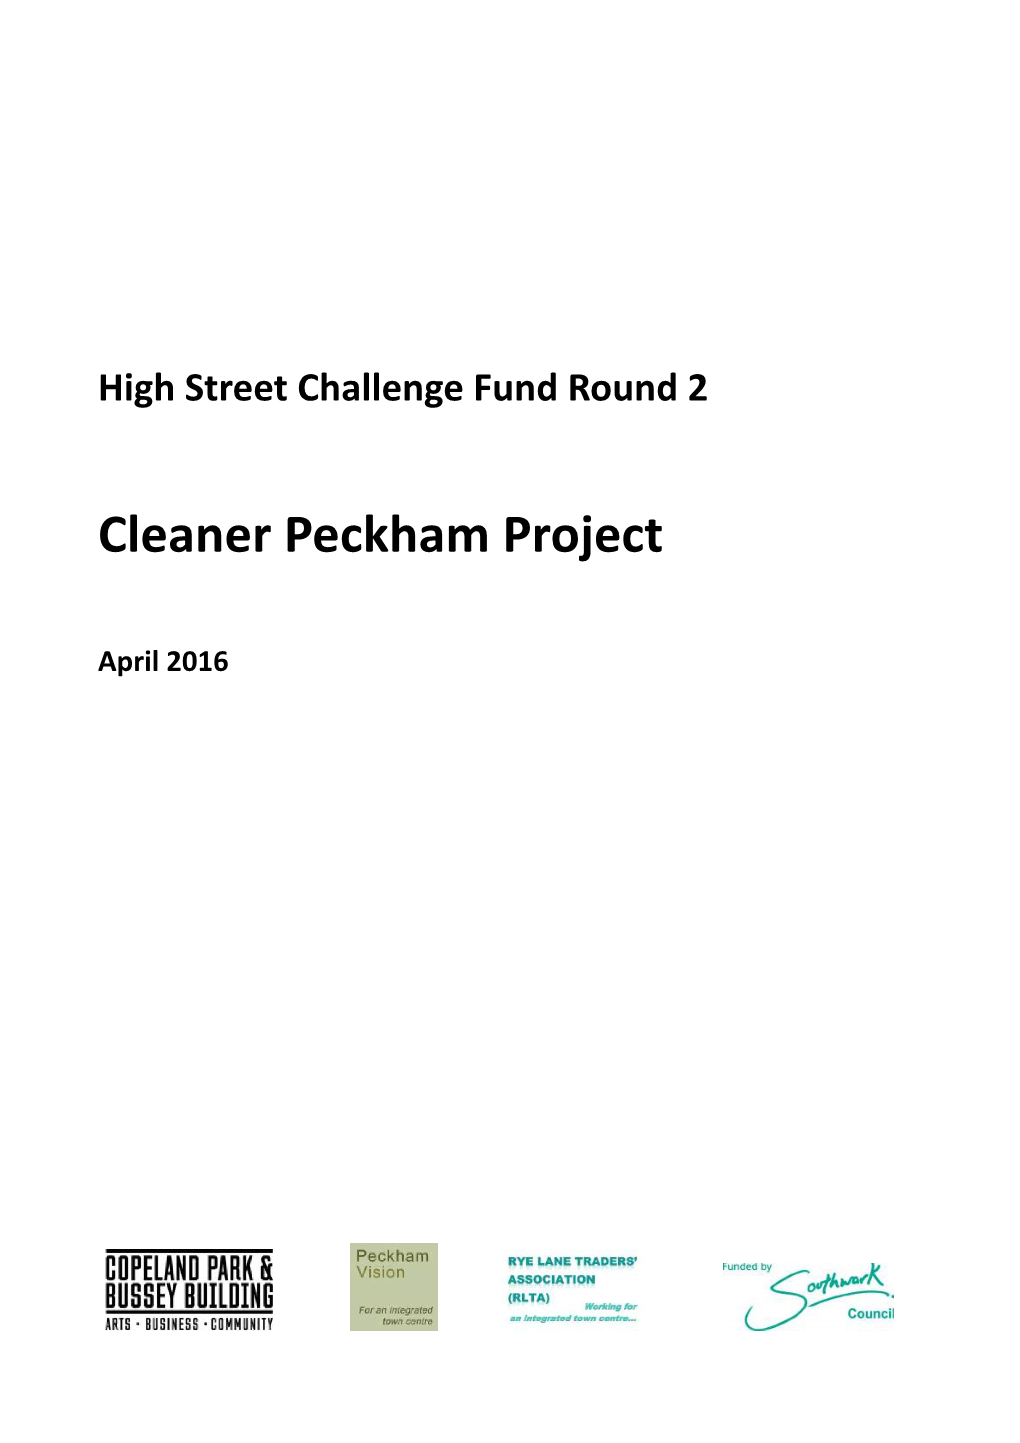 Cleaner Peckham Project